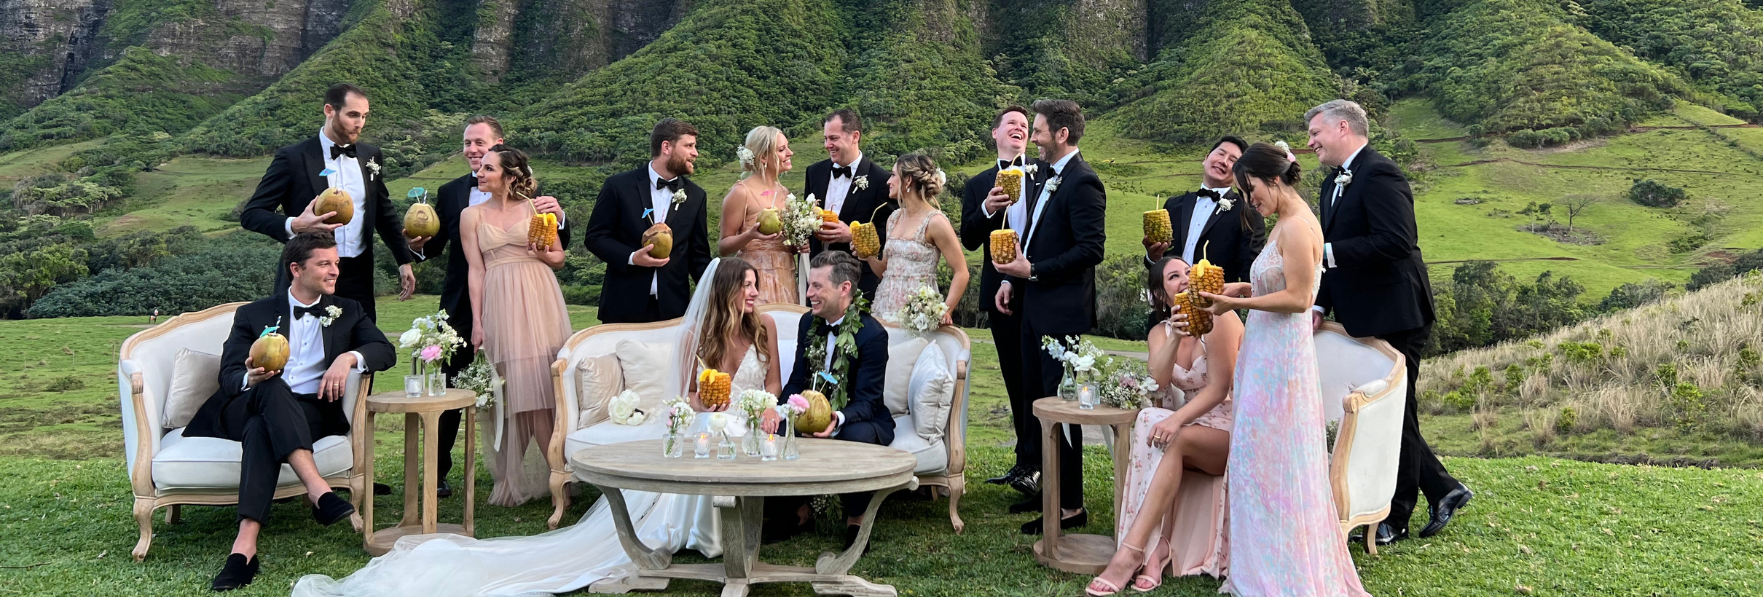 Ultimate Guide To Wedding Catering Services In Oahu, Hawaii